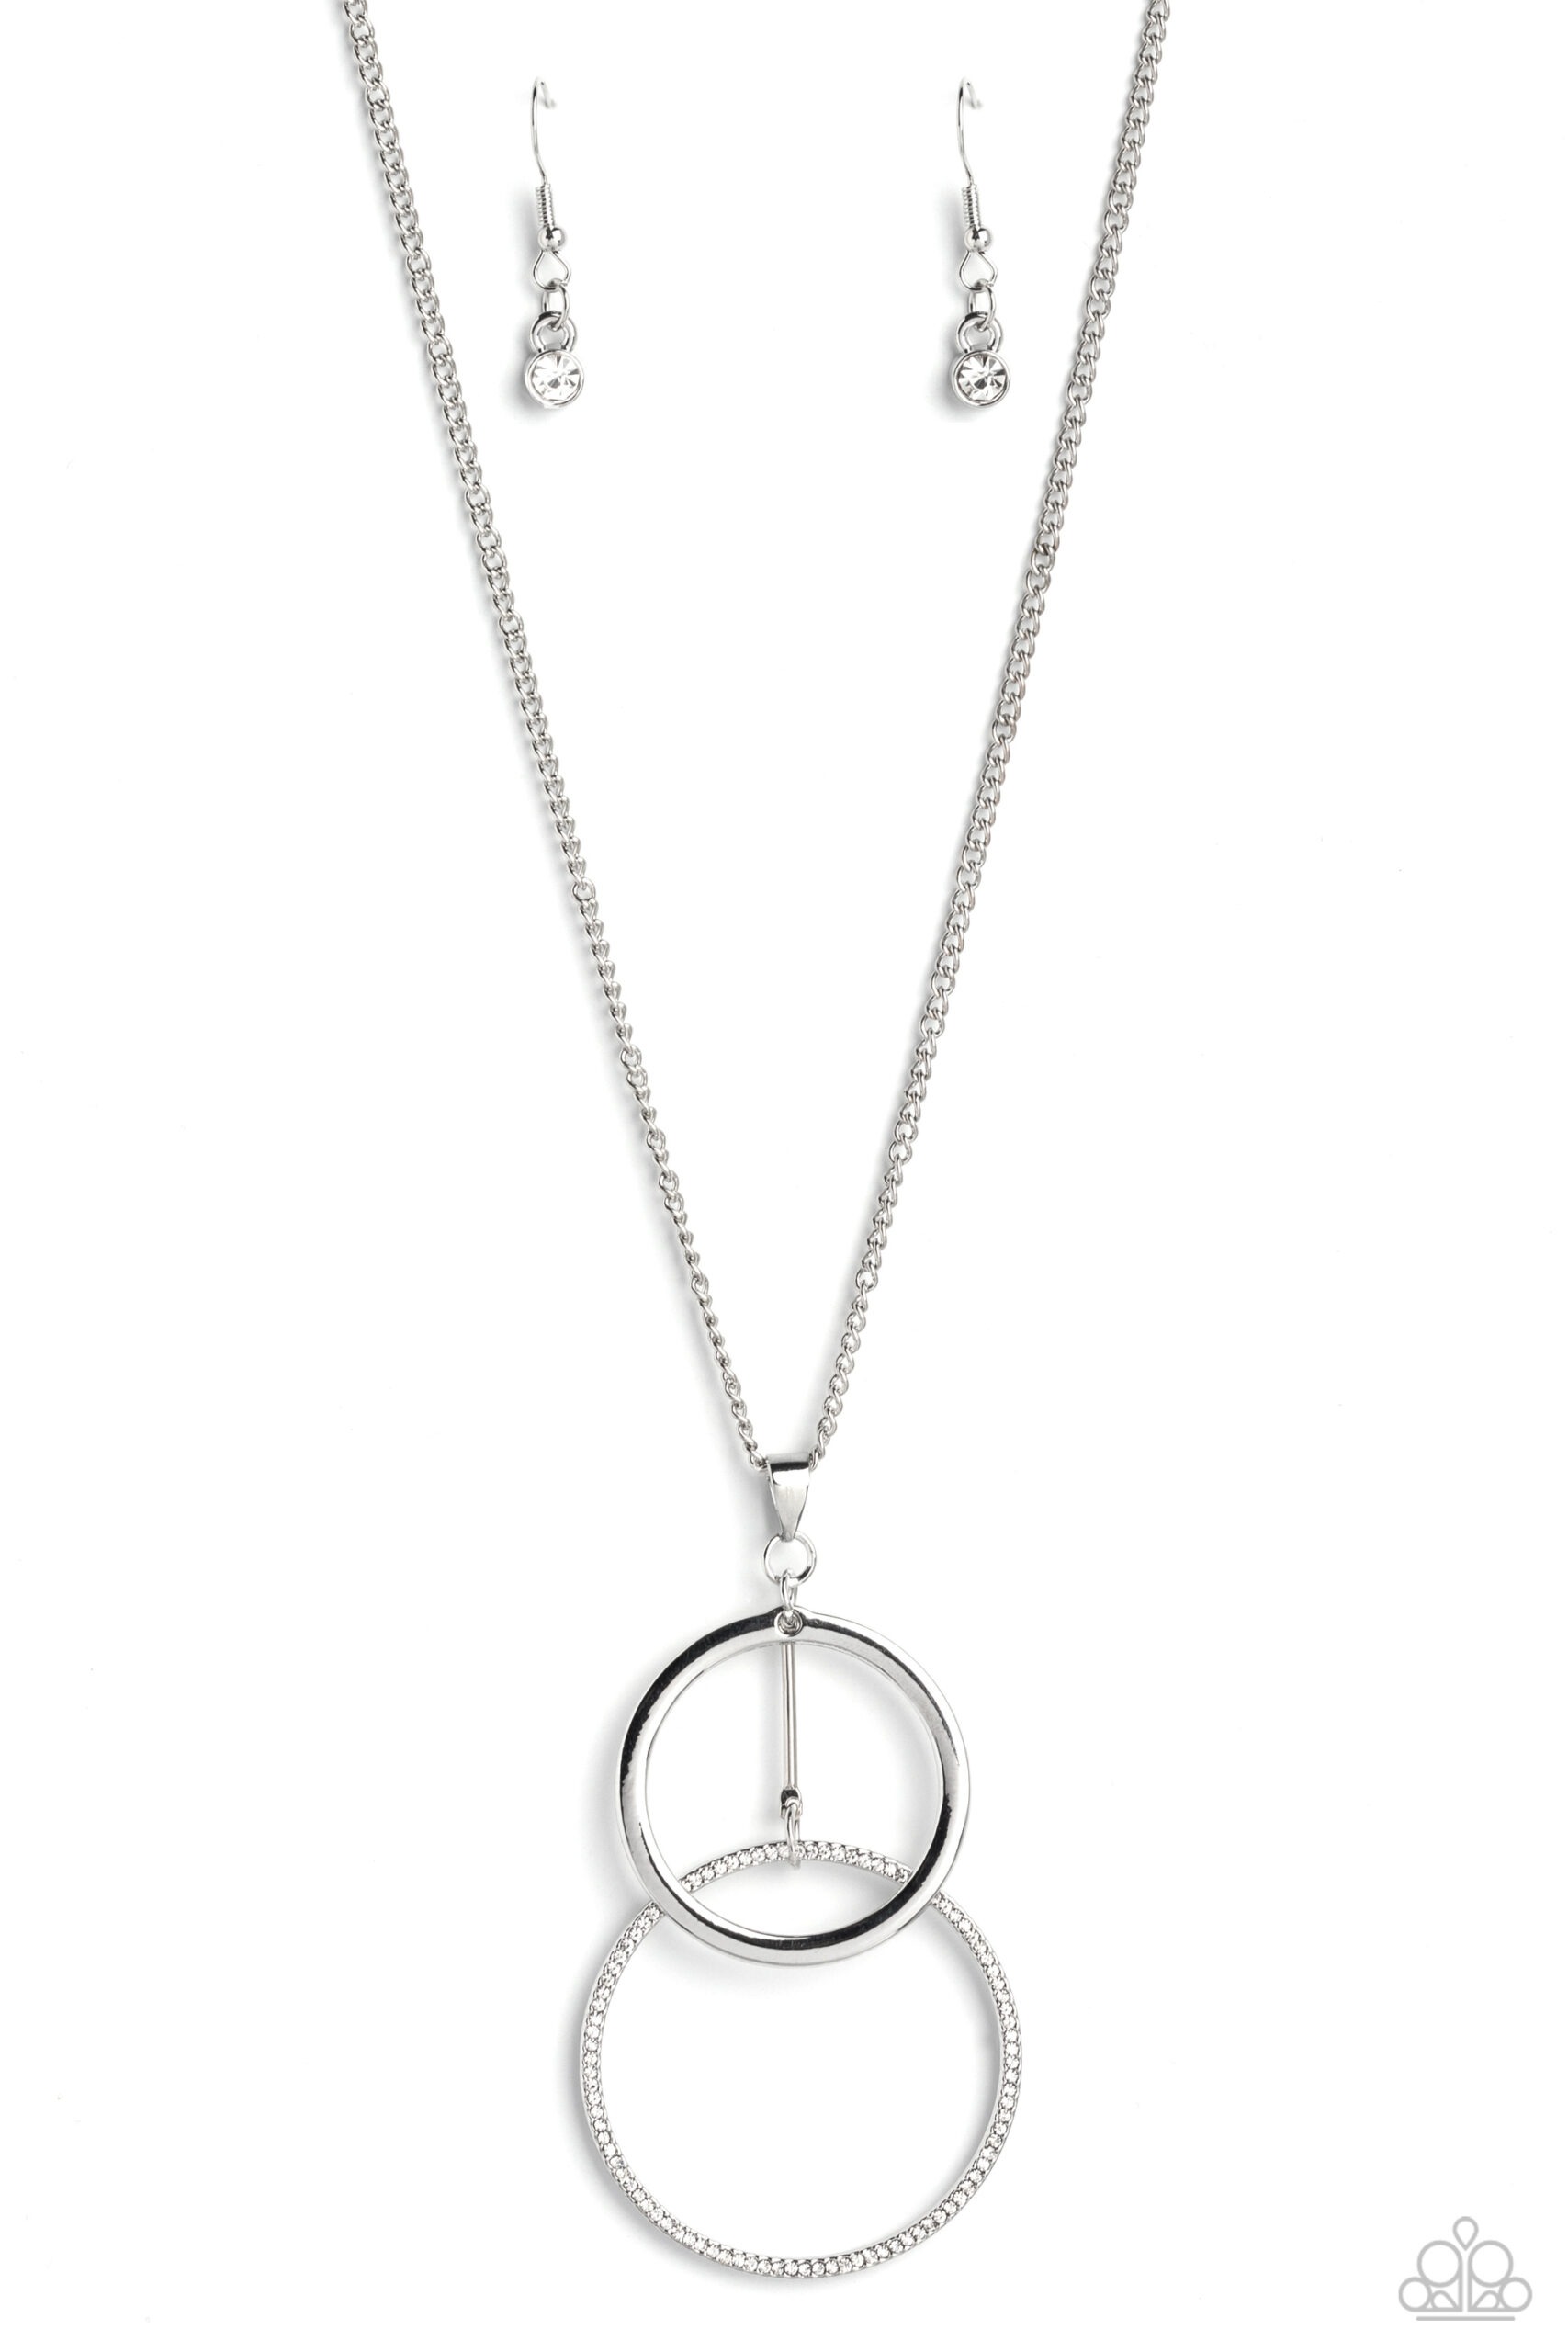 Necklace - Wishing Well Whimsy - White